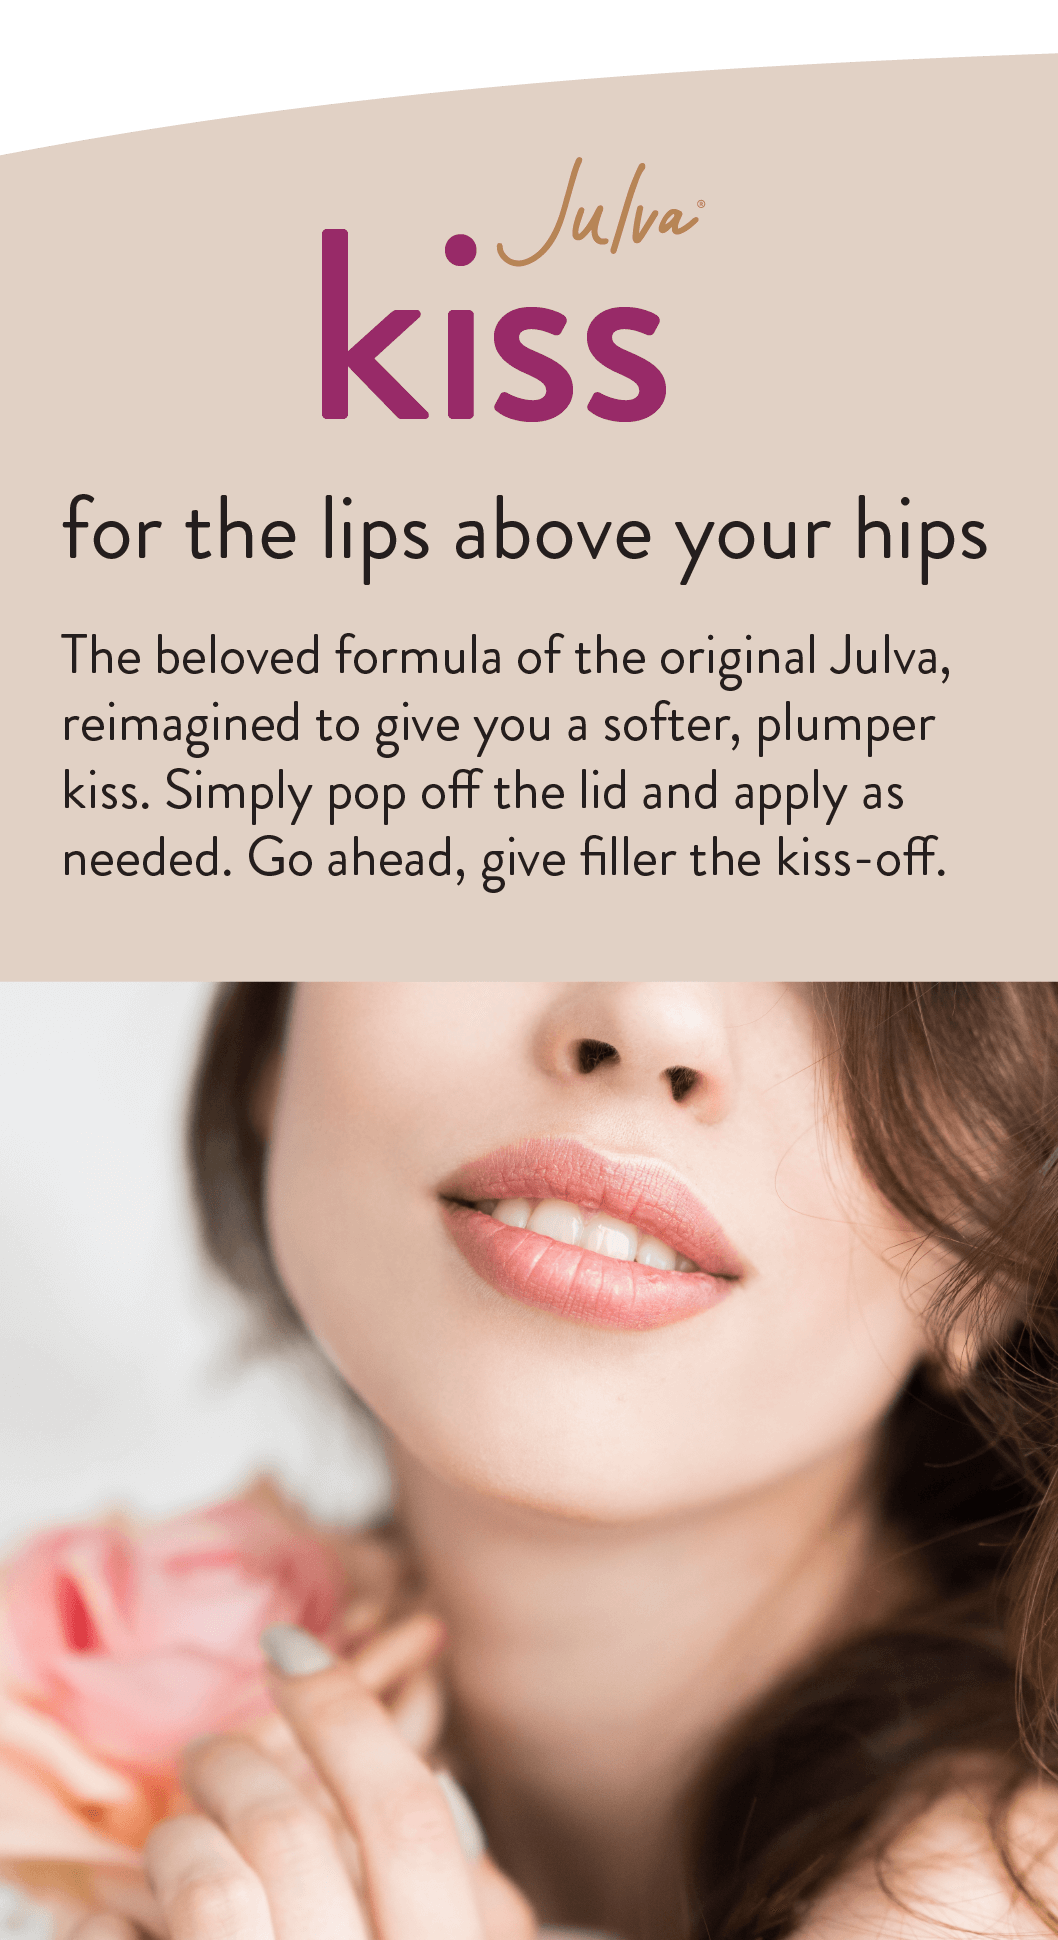 Julva Kiss for the lips above your hips The beloved formula of the original Julva, reimagined to give you a softer, plumper kiss. Simply pop off the lid and apply as needed. Go ahead, give filler the kiss-off.